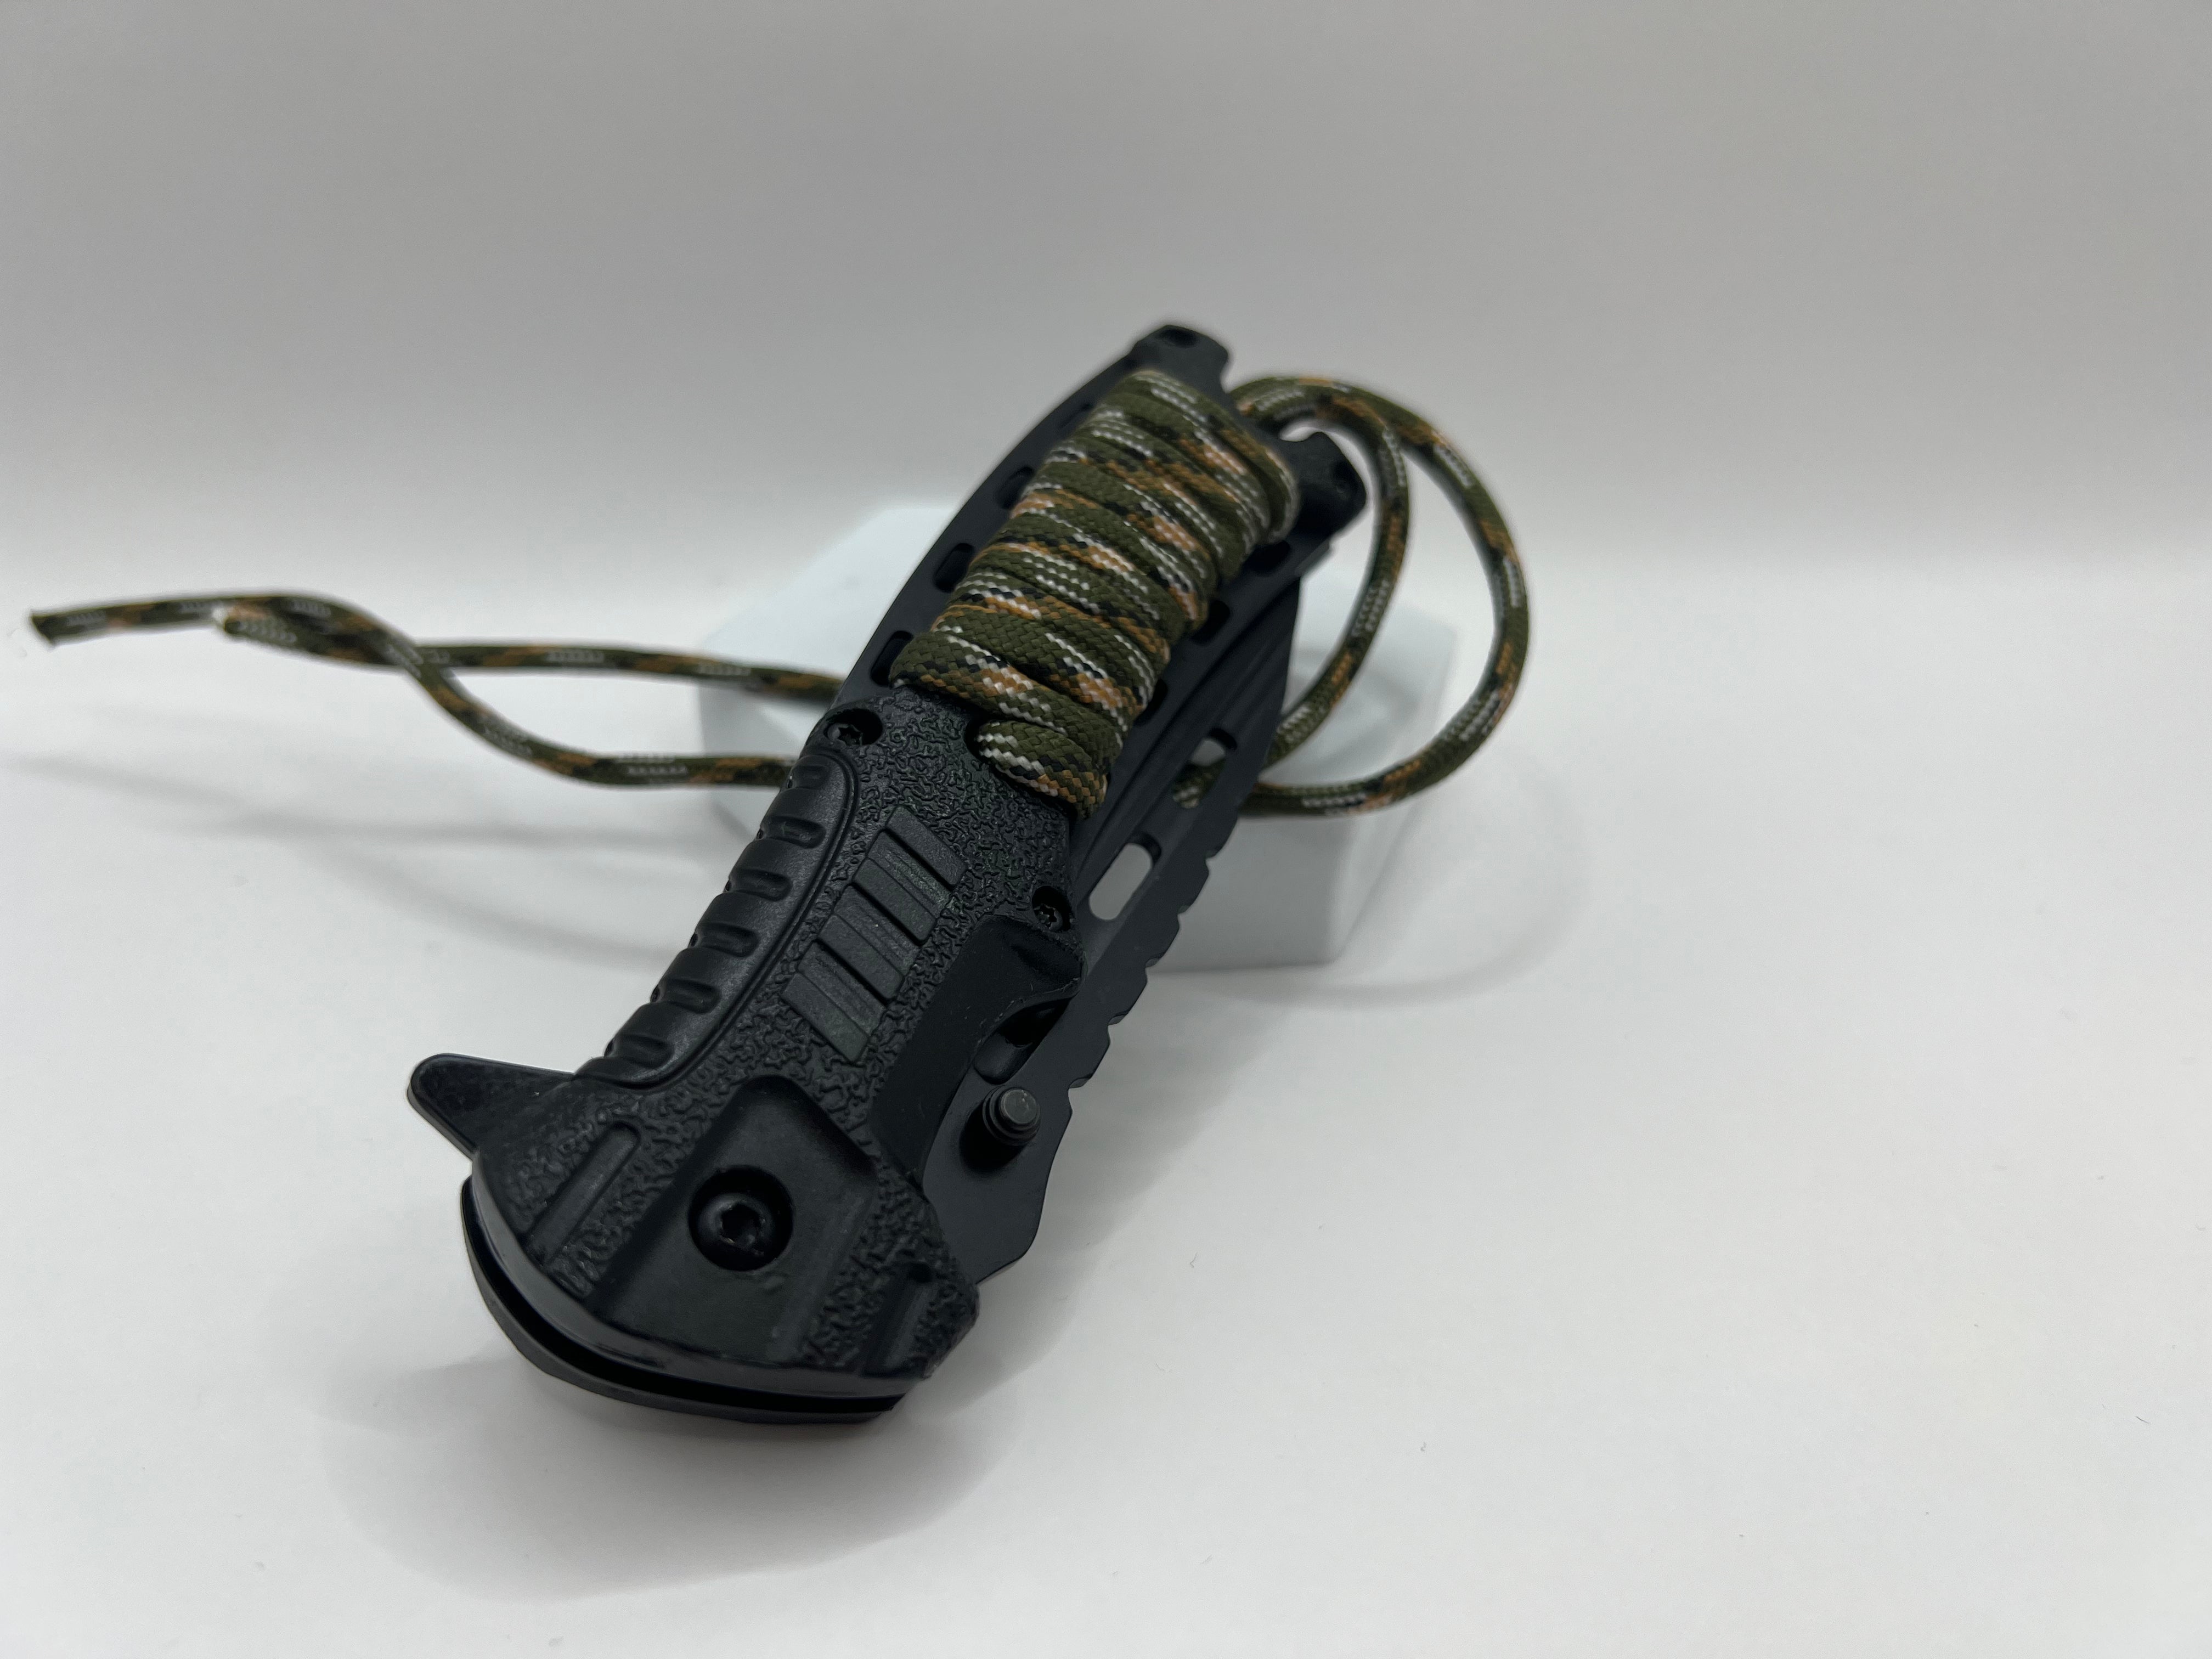 Tactical camo one-hand knife with fire starter and clip